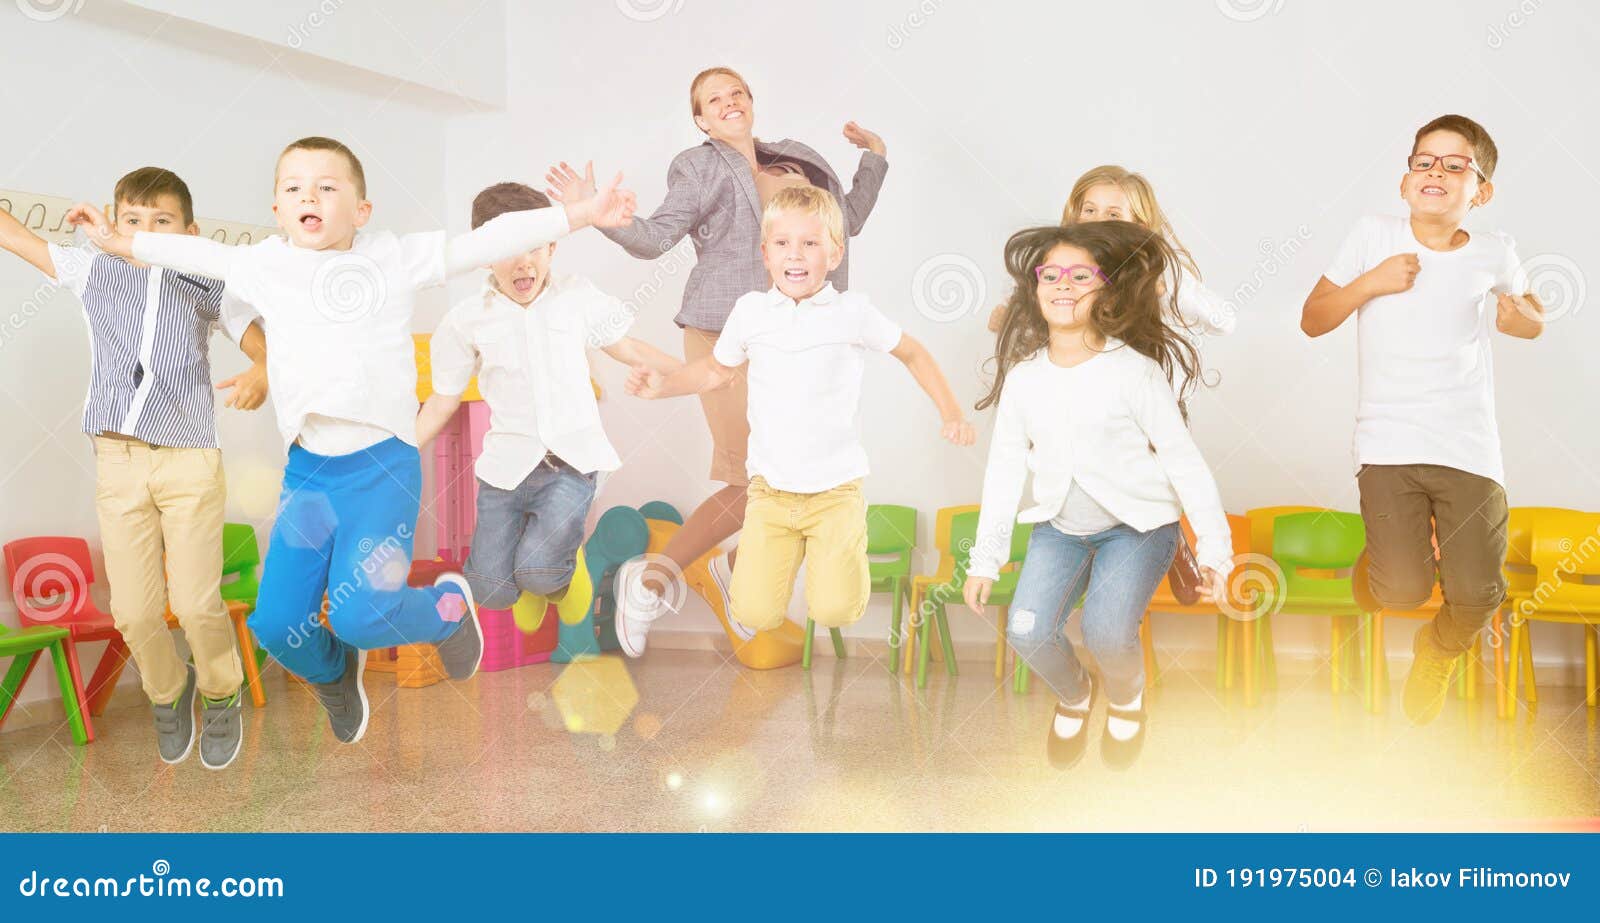 children with teacher jumping together in schoolroom